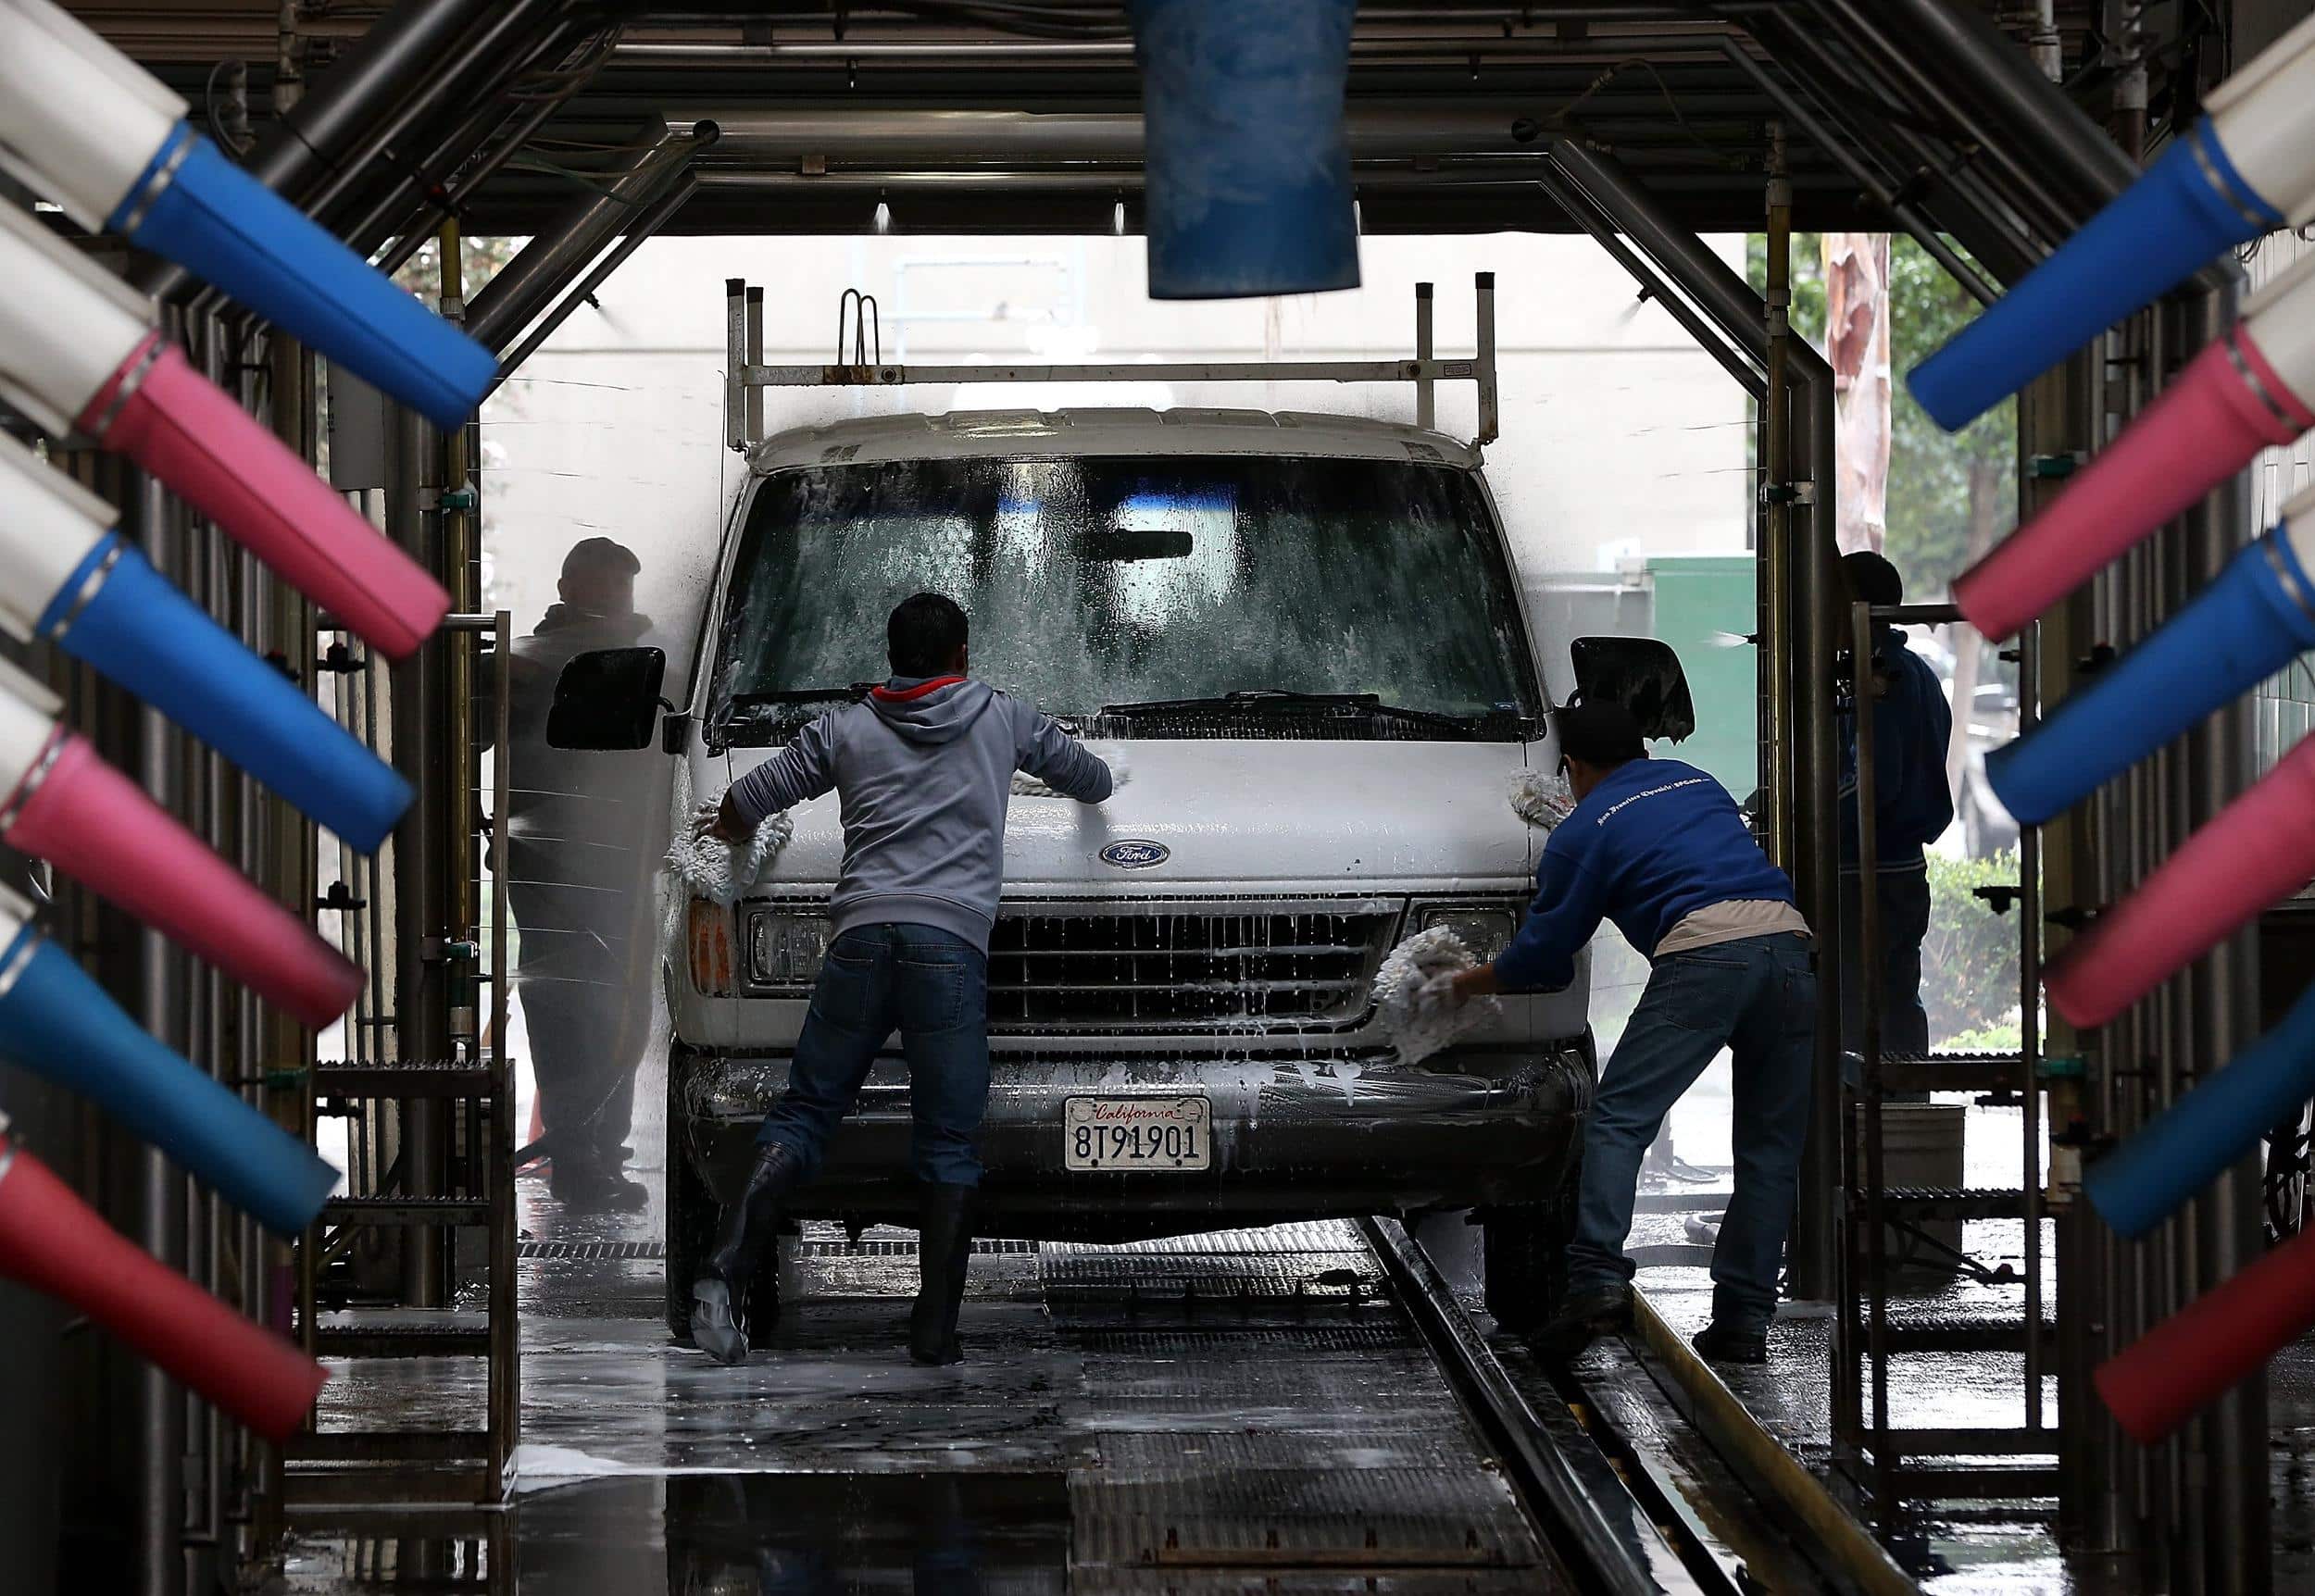 Two individuals are washing a van in an automated car wash with blue and pink foam brushes.